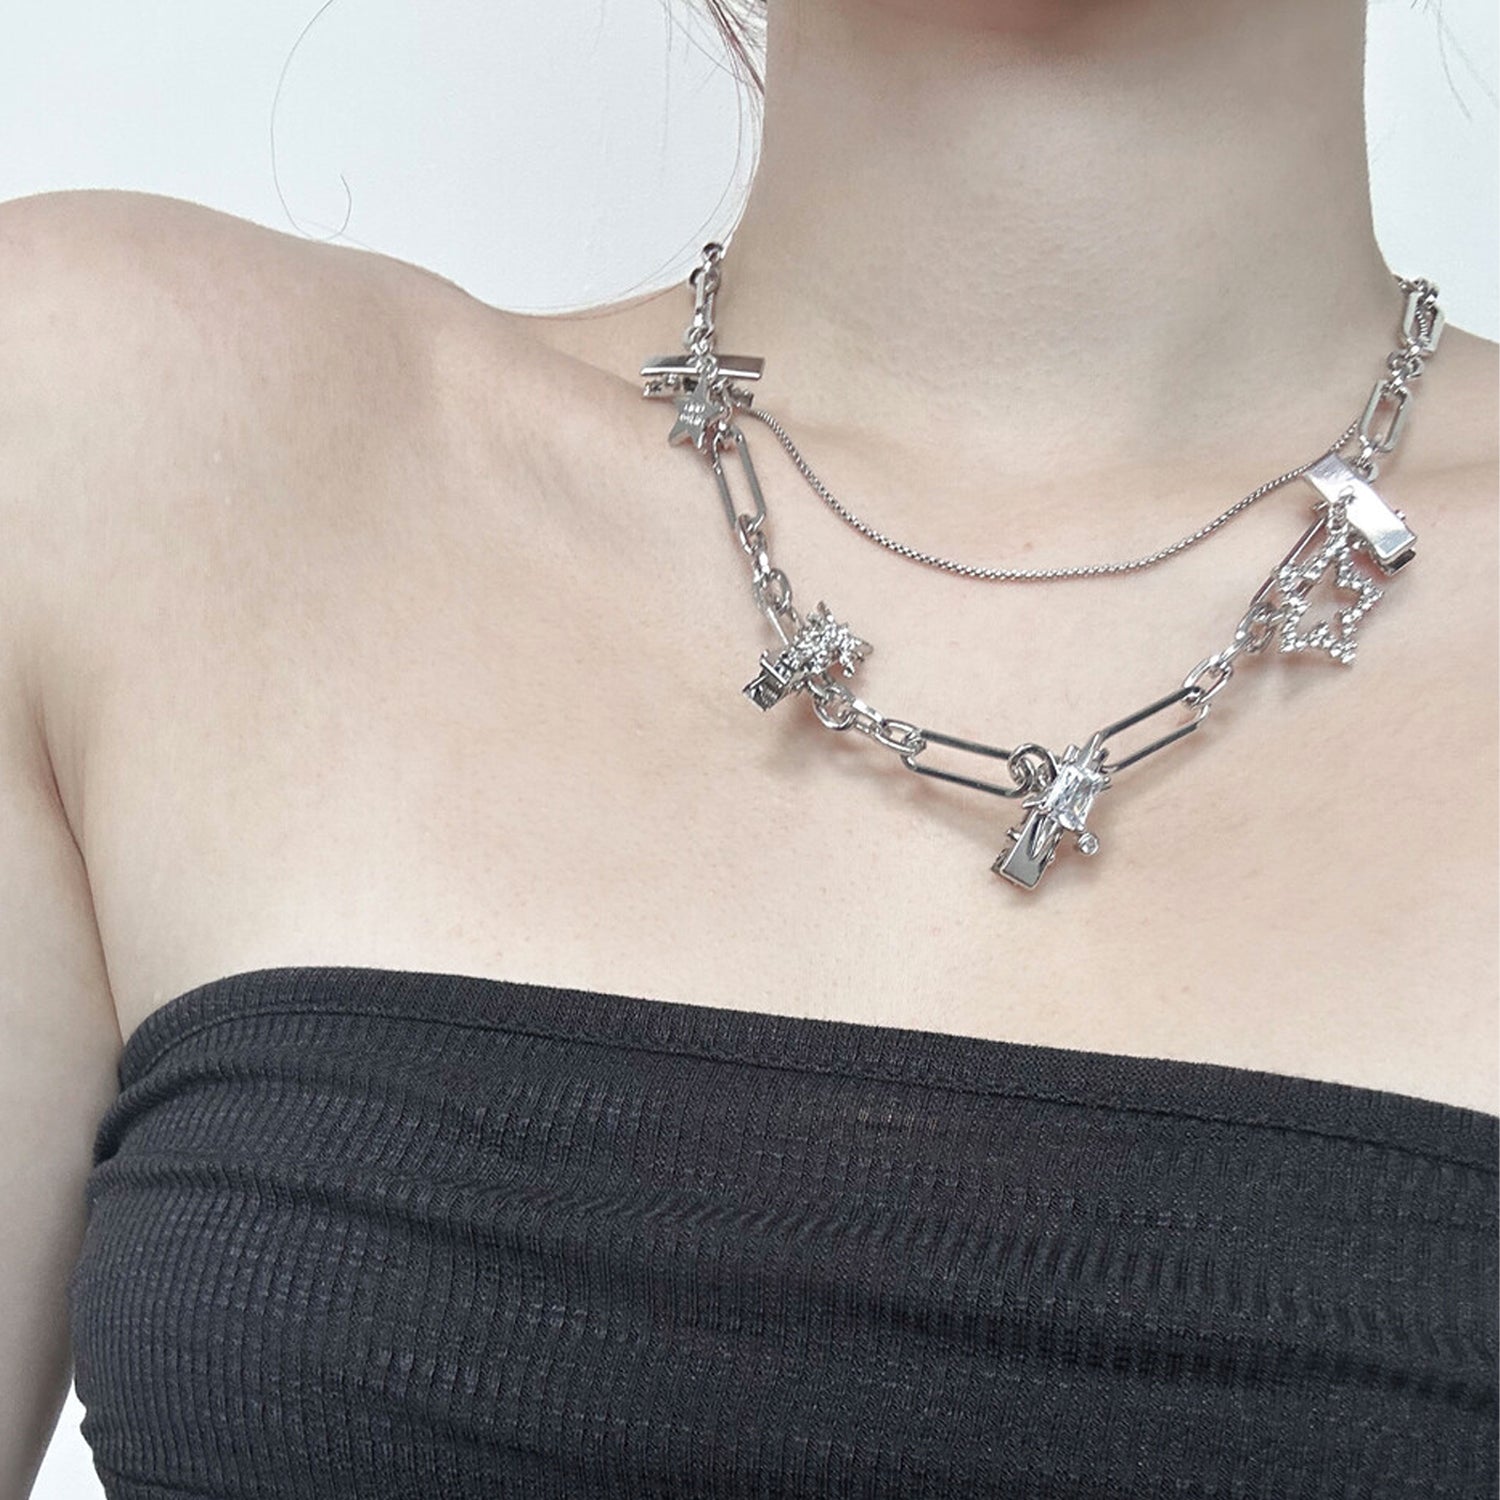 Hairpin chain set necklace